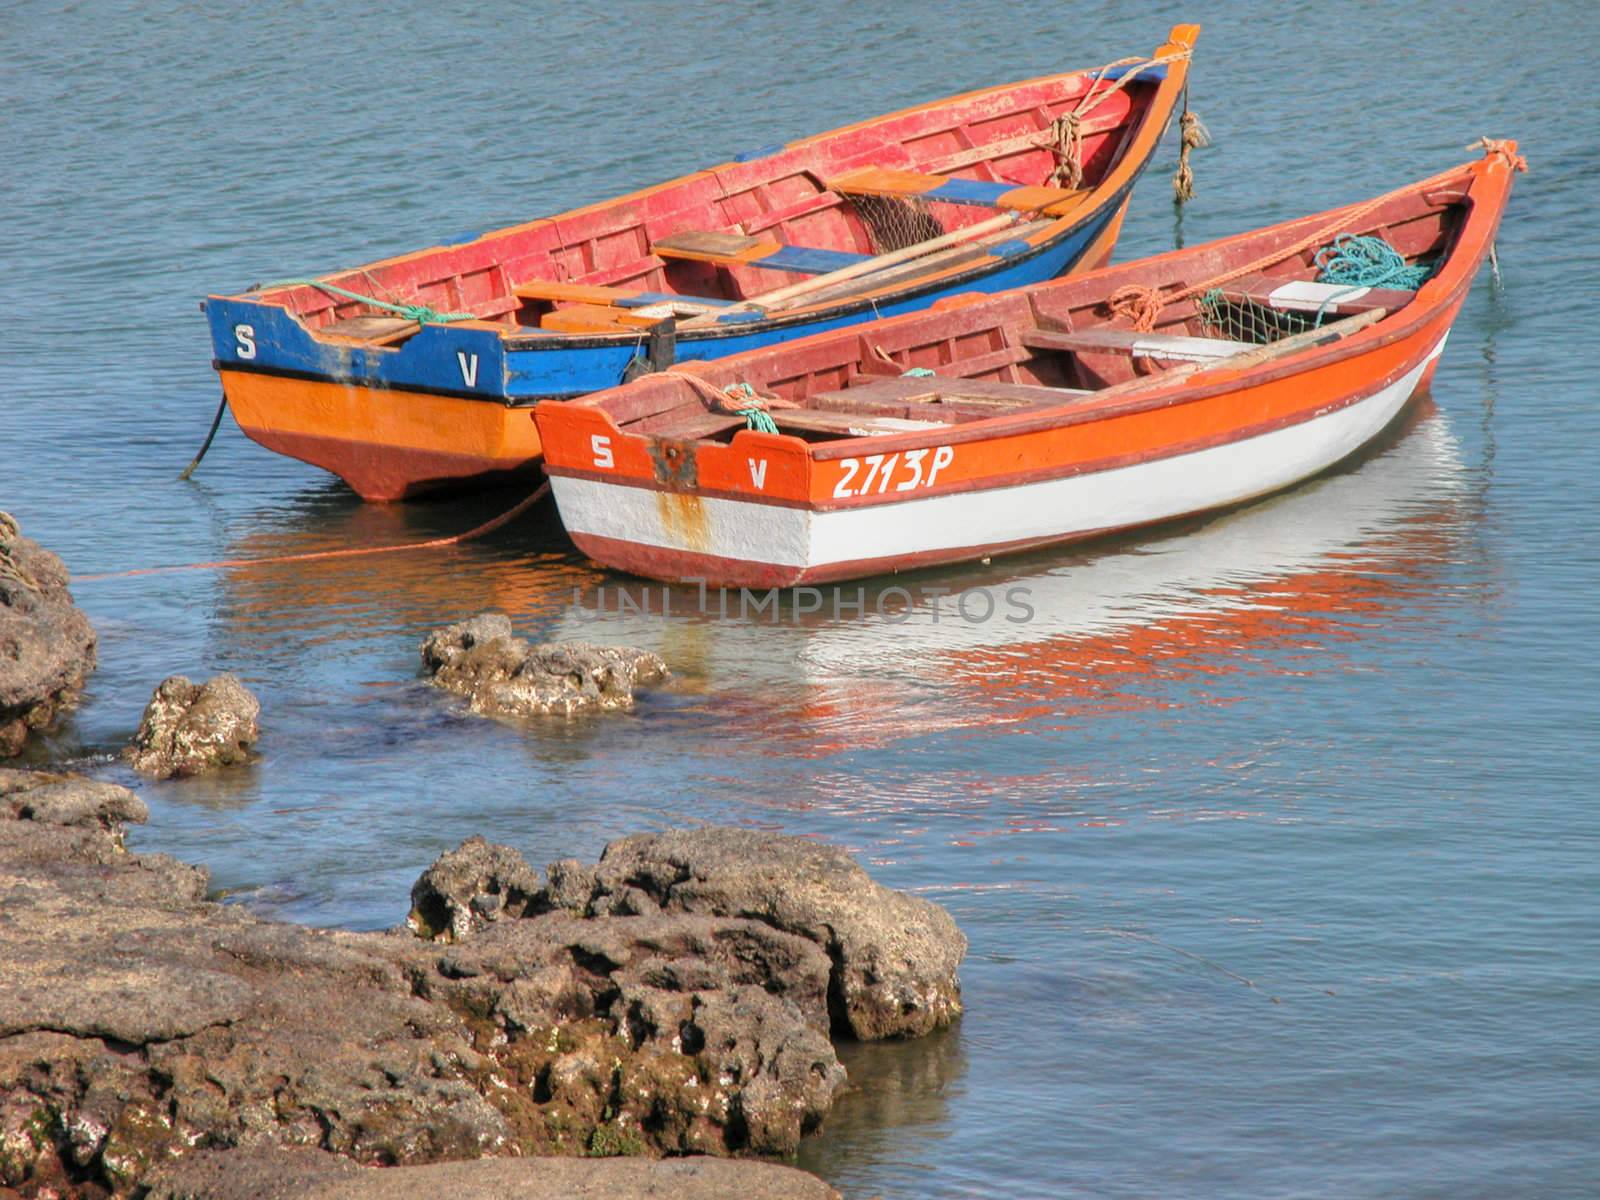 Boats in Cpo Verde, May 2003 by jovannig